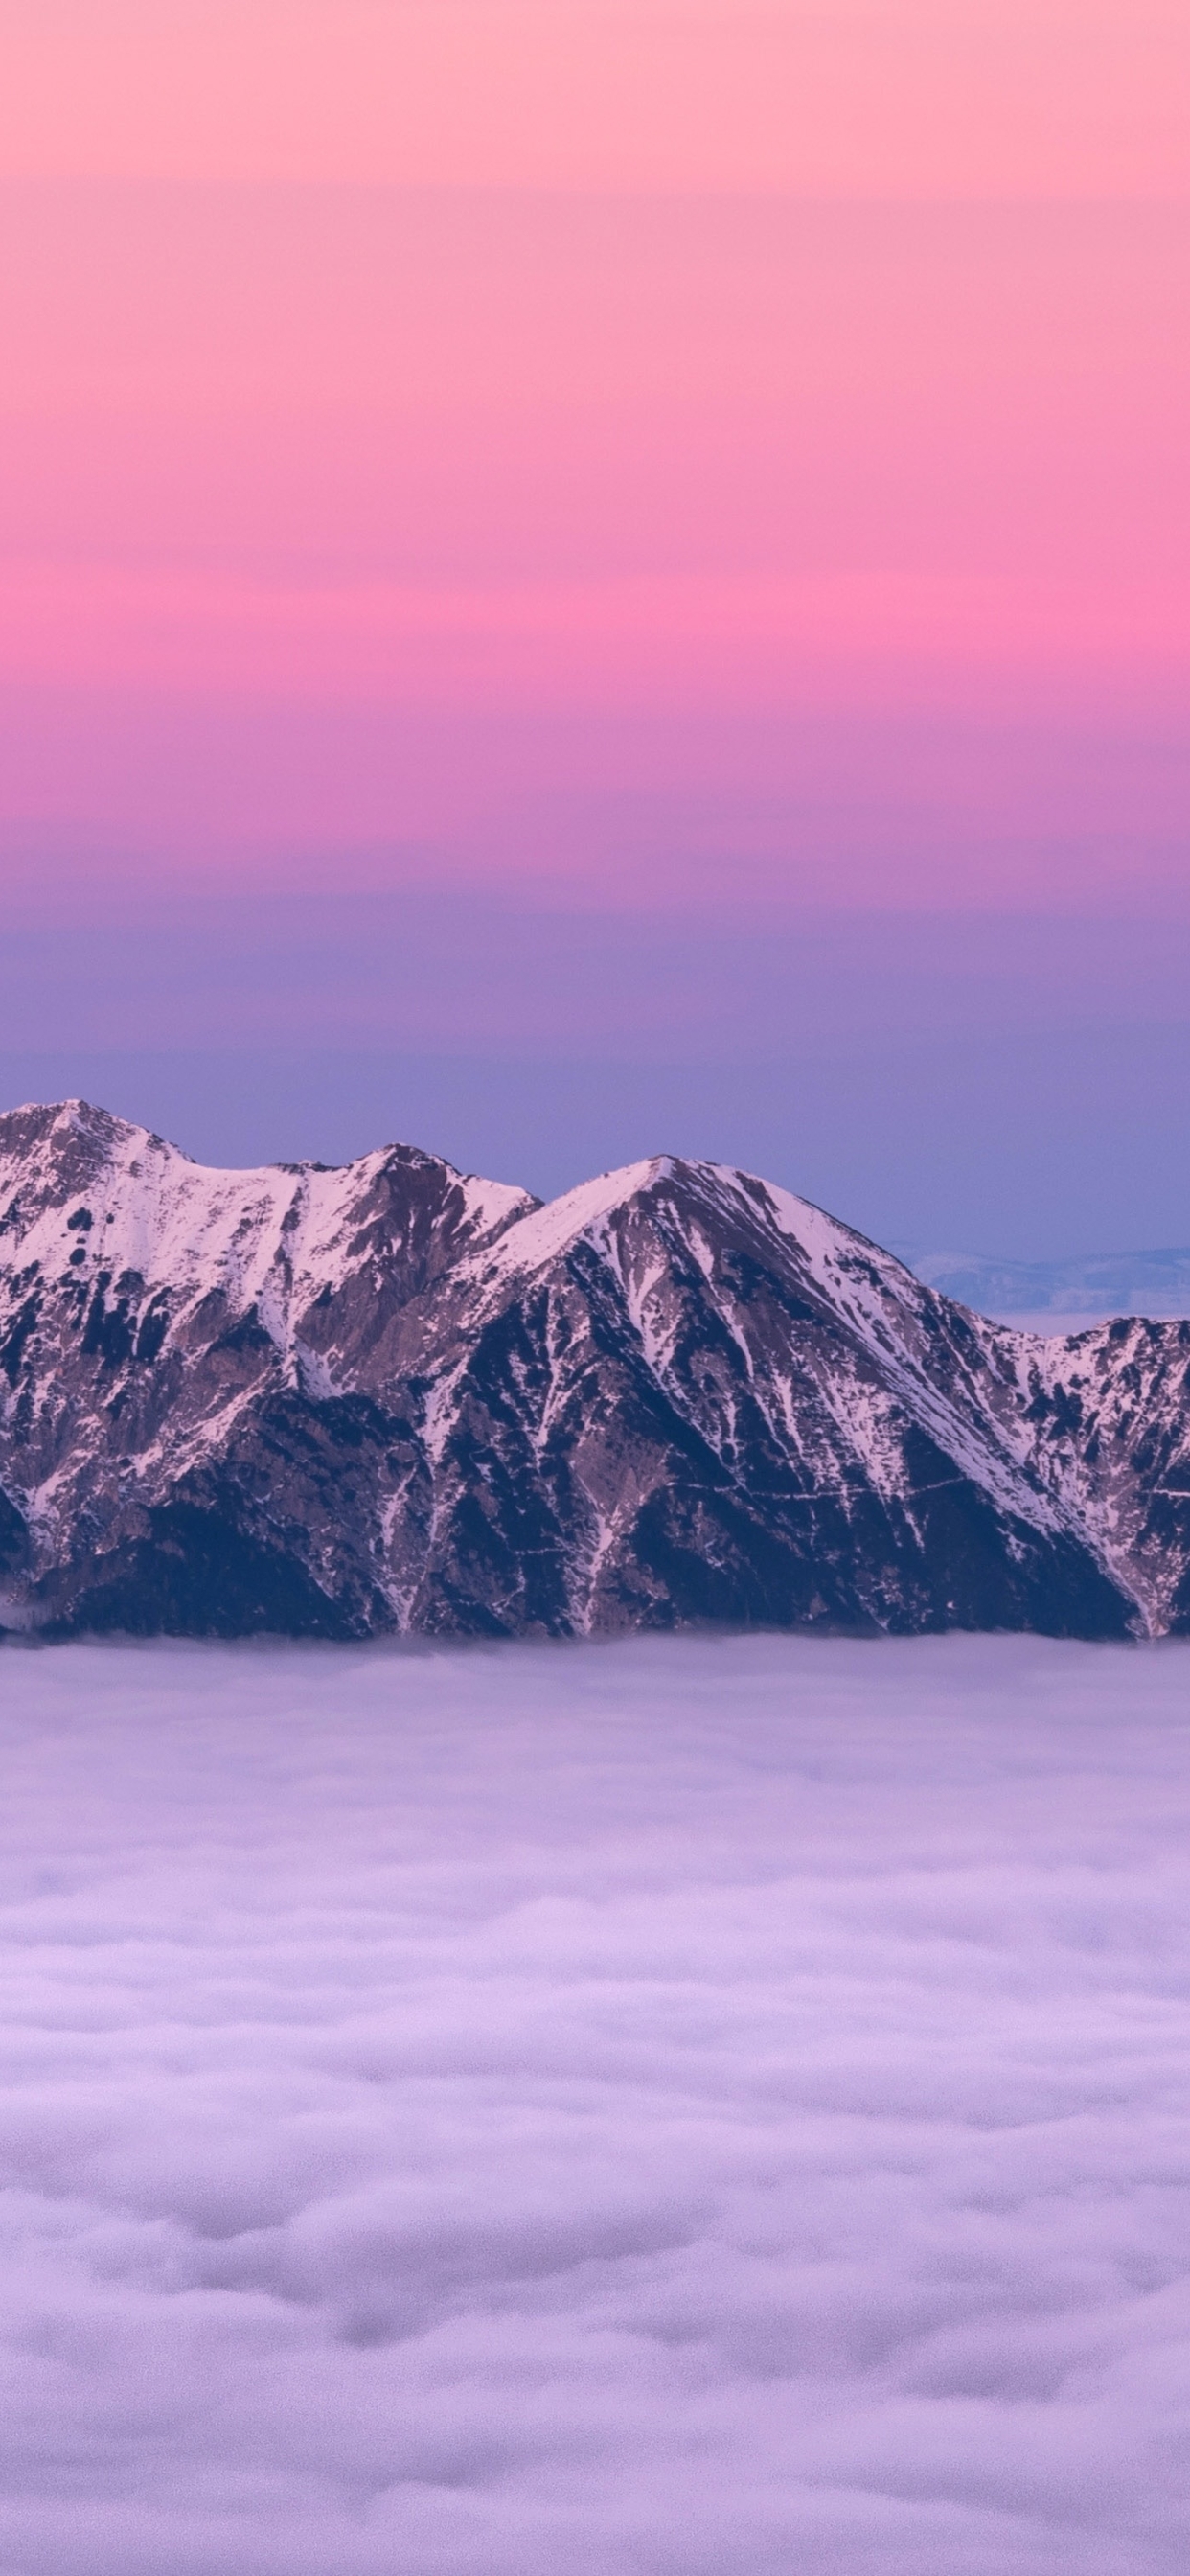 1242x26 Mountain Peaks Fog And Pink Clouds Iphone Xs Max Wallpaper Hd Nature 4k Wallpapers Images Photos And Background